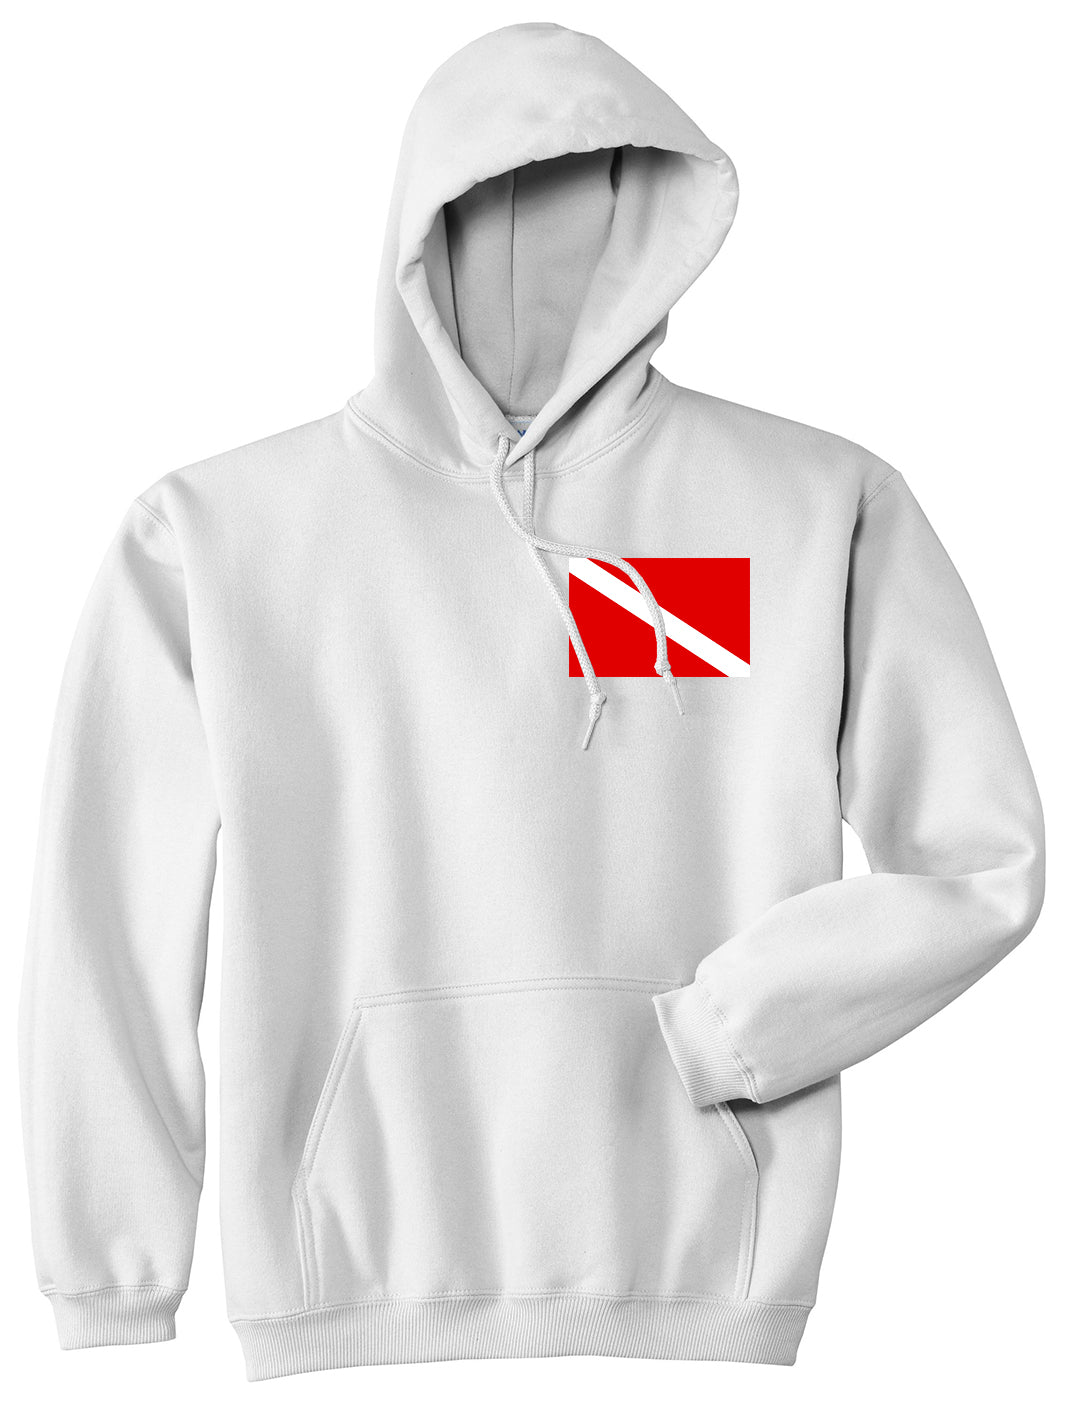 Scuba Dive Flag Chest Mens White Pullover Hoodie by Kings Of NY